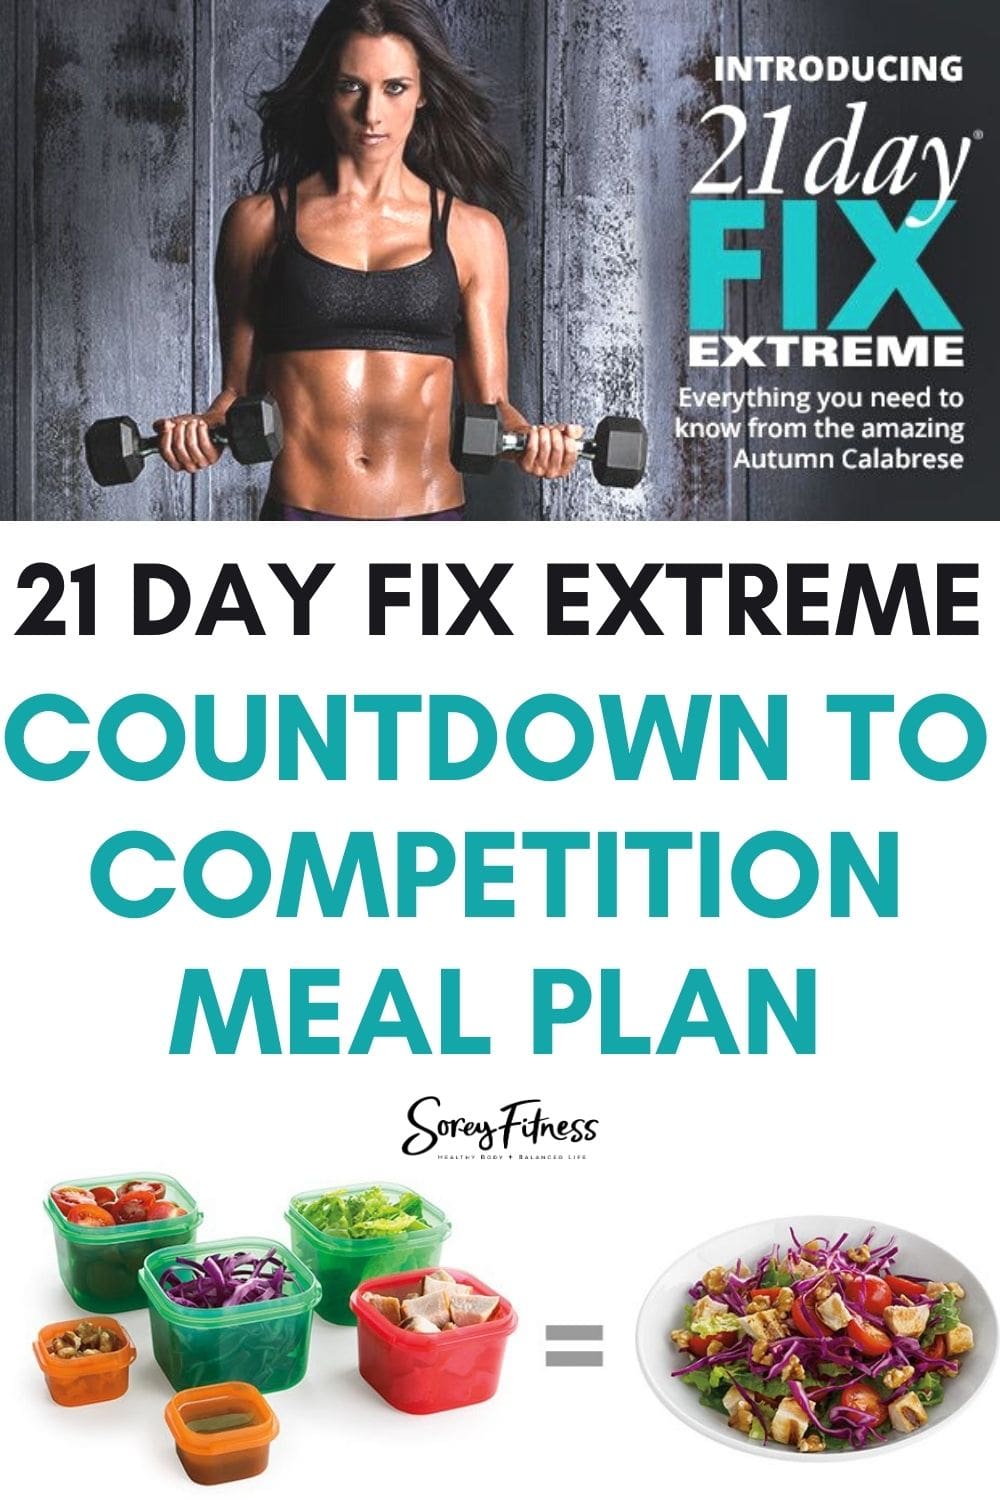 21 day fix extreme eating plan